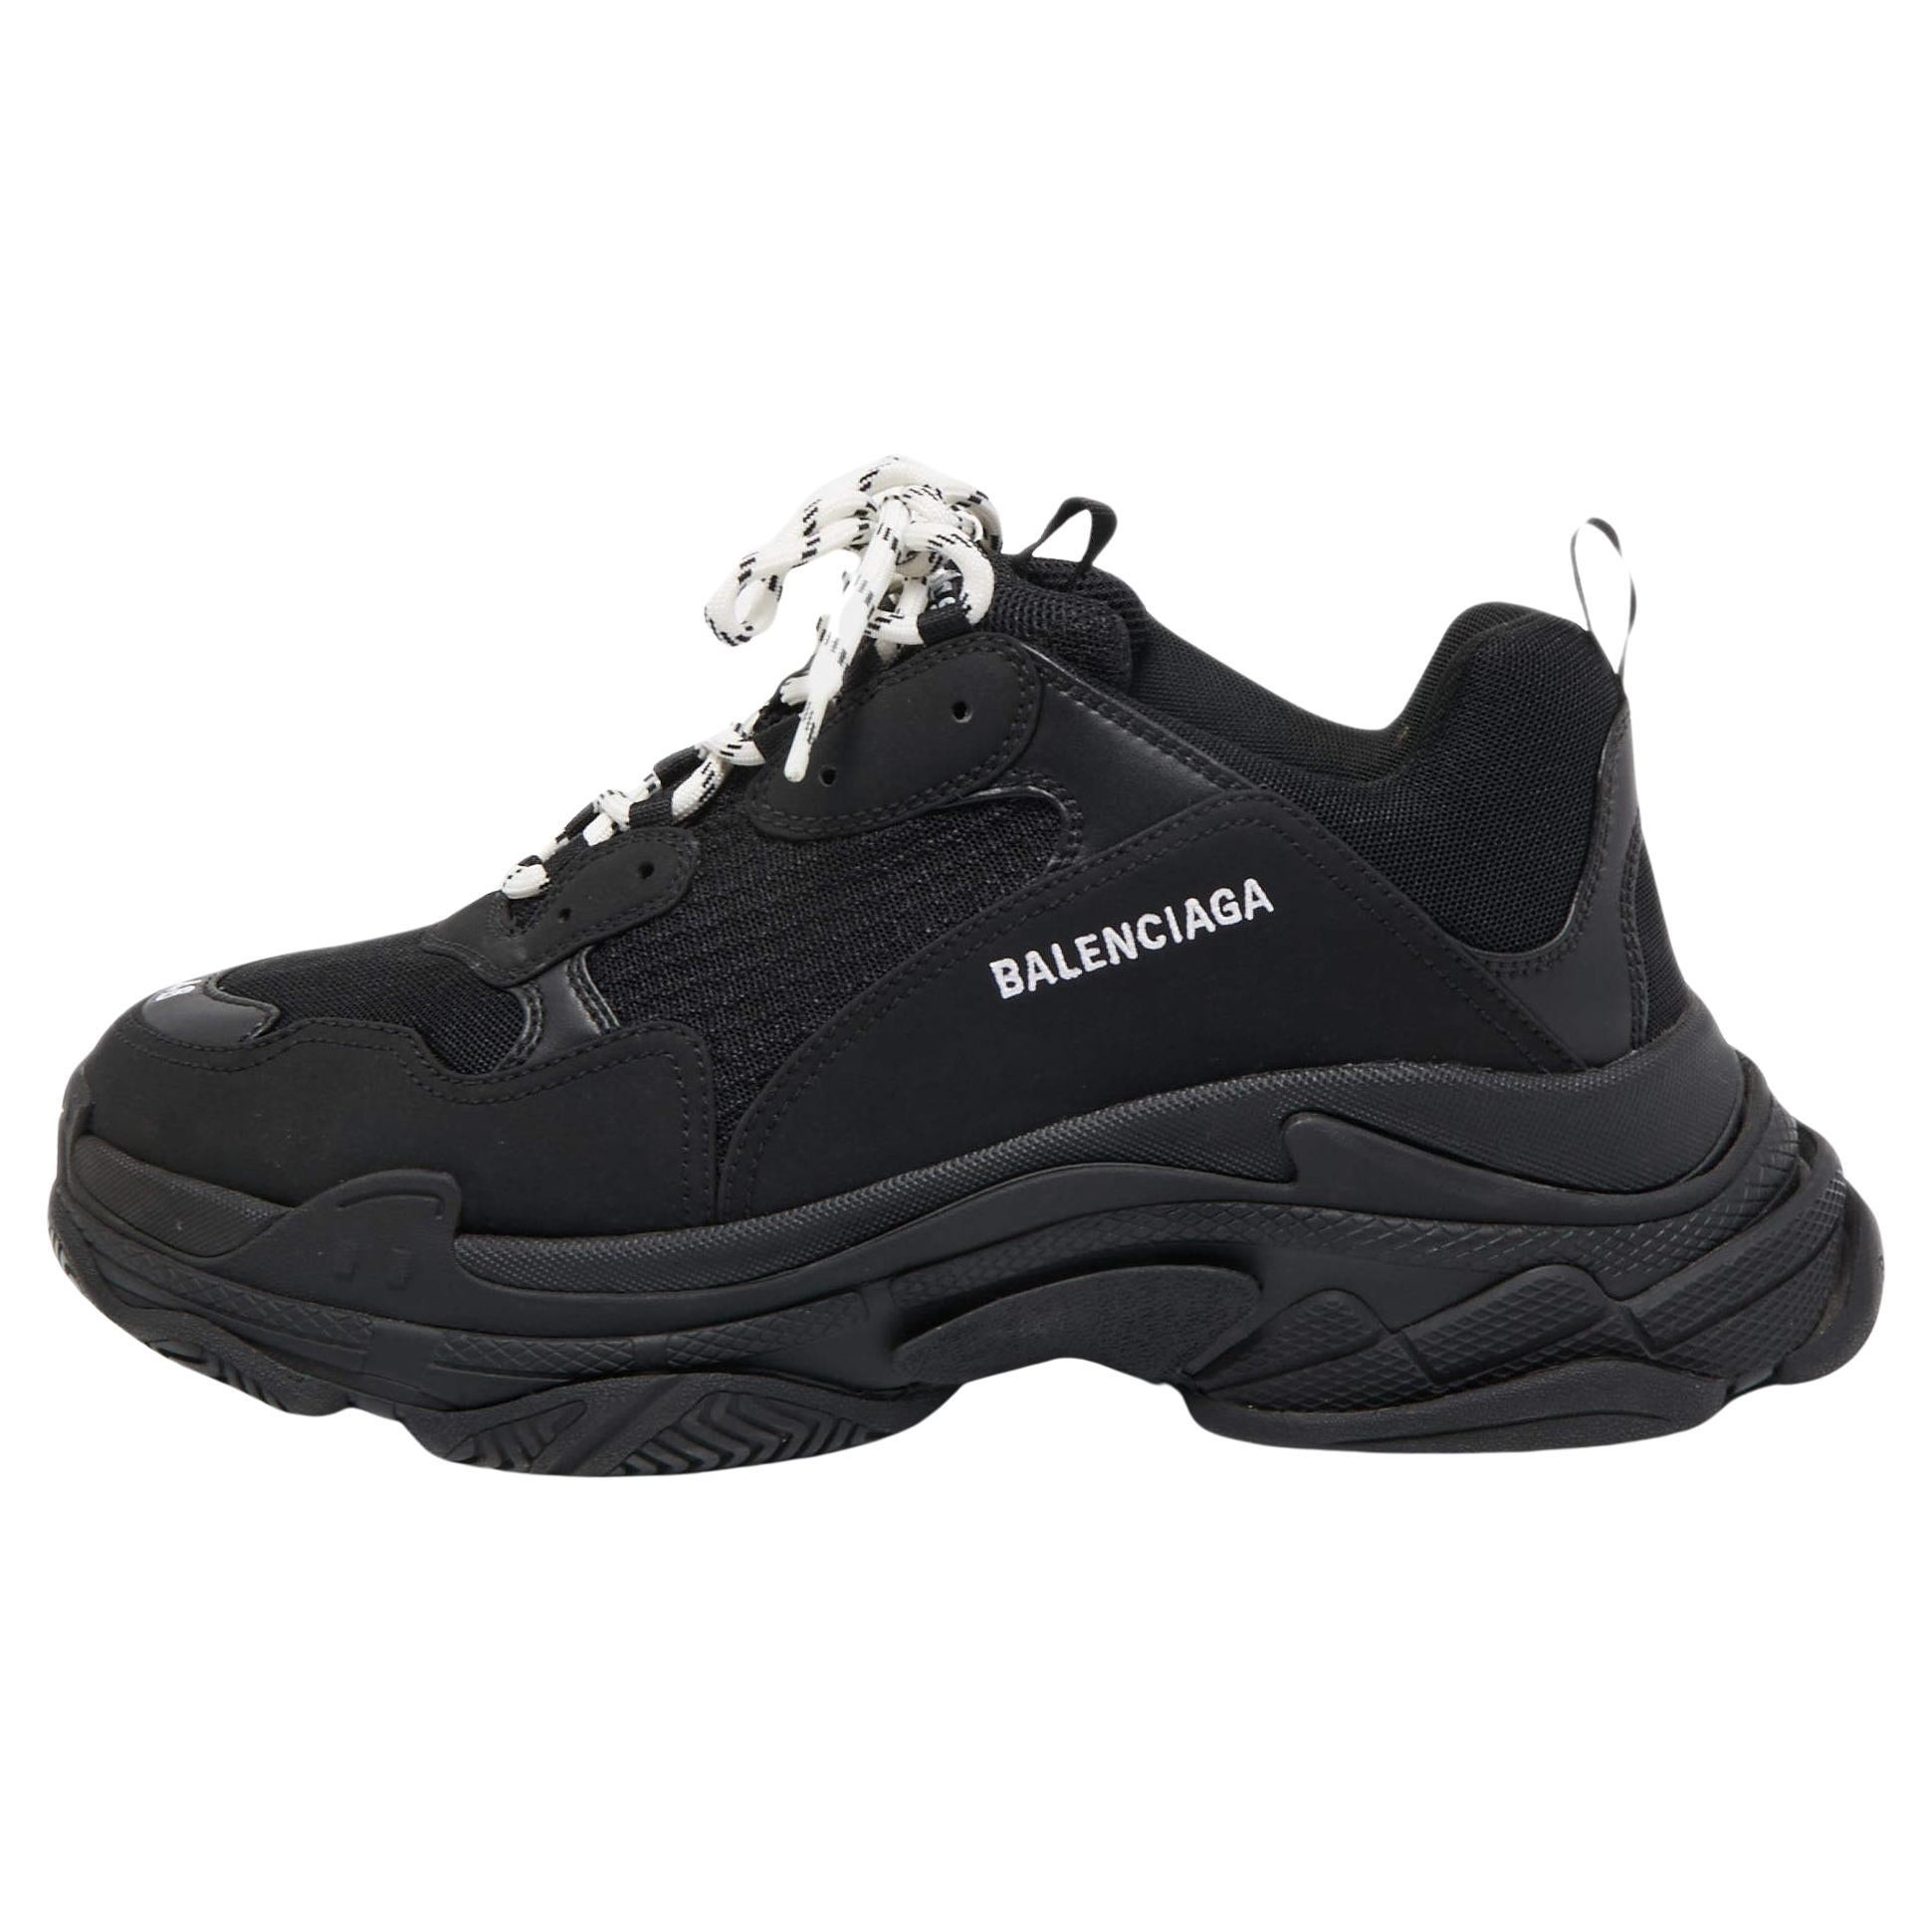 Balenciaga Black Mesh and Leather Triple S Sneakers Size 46